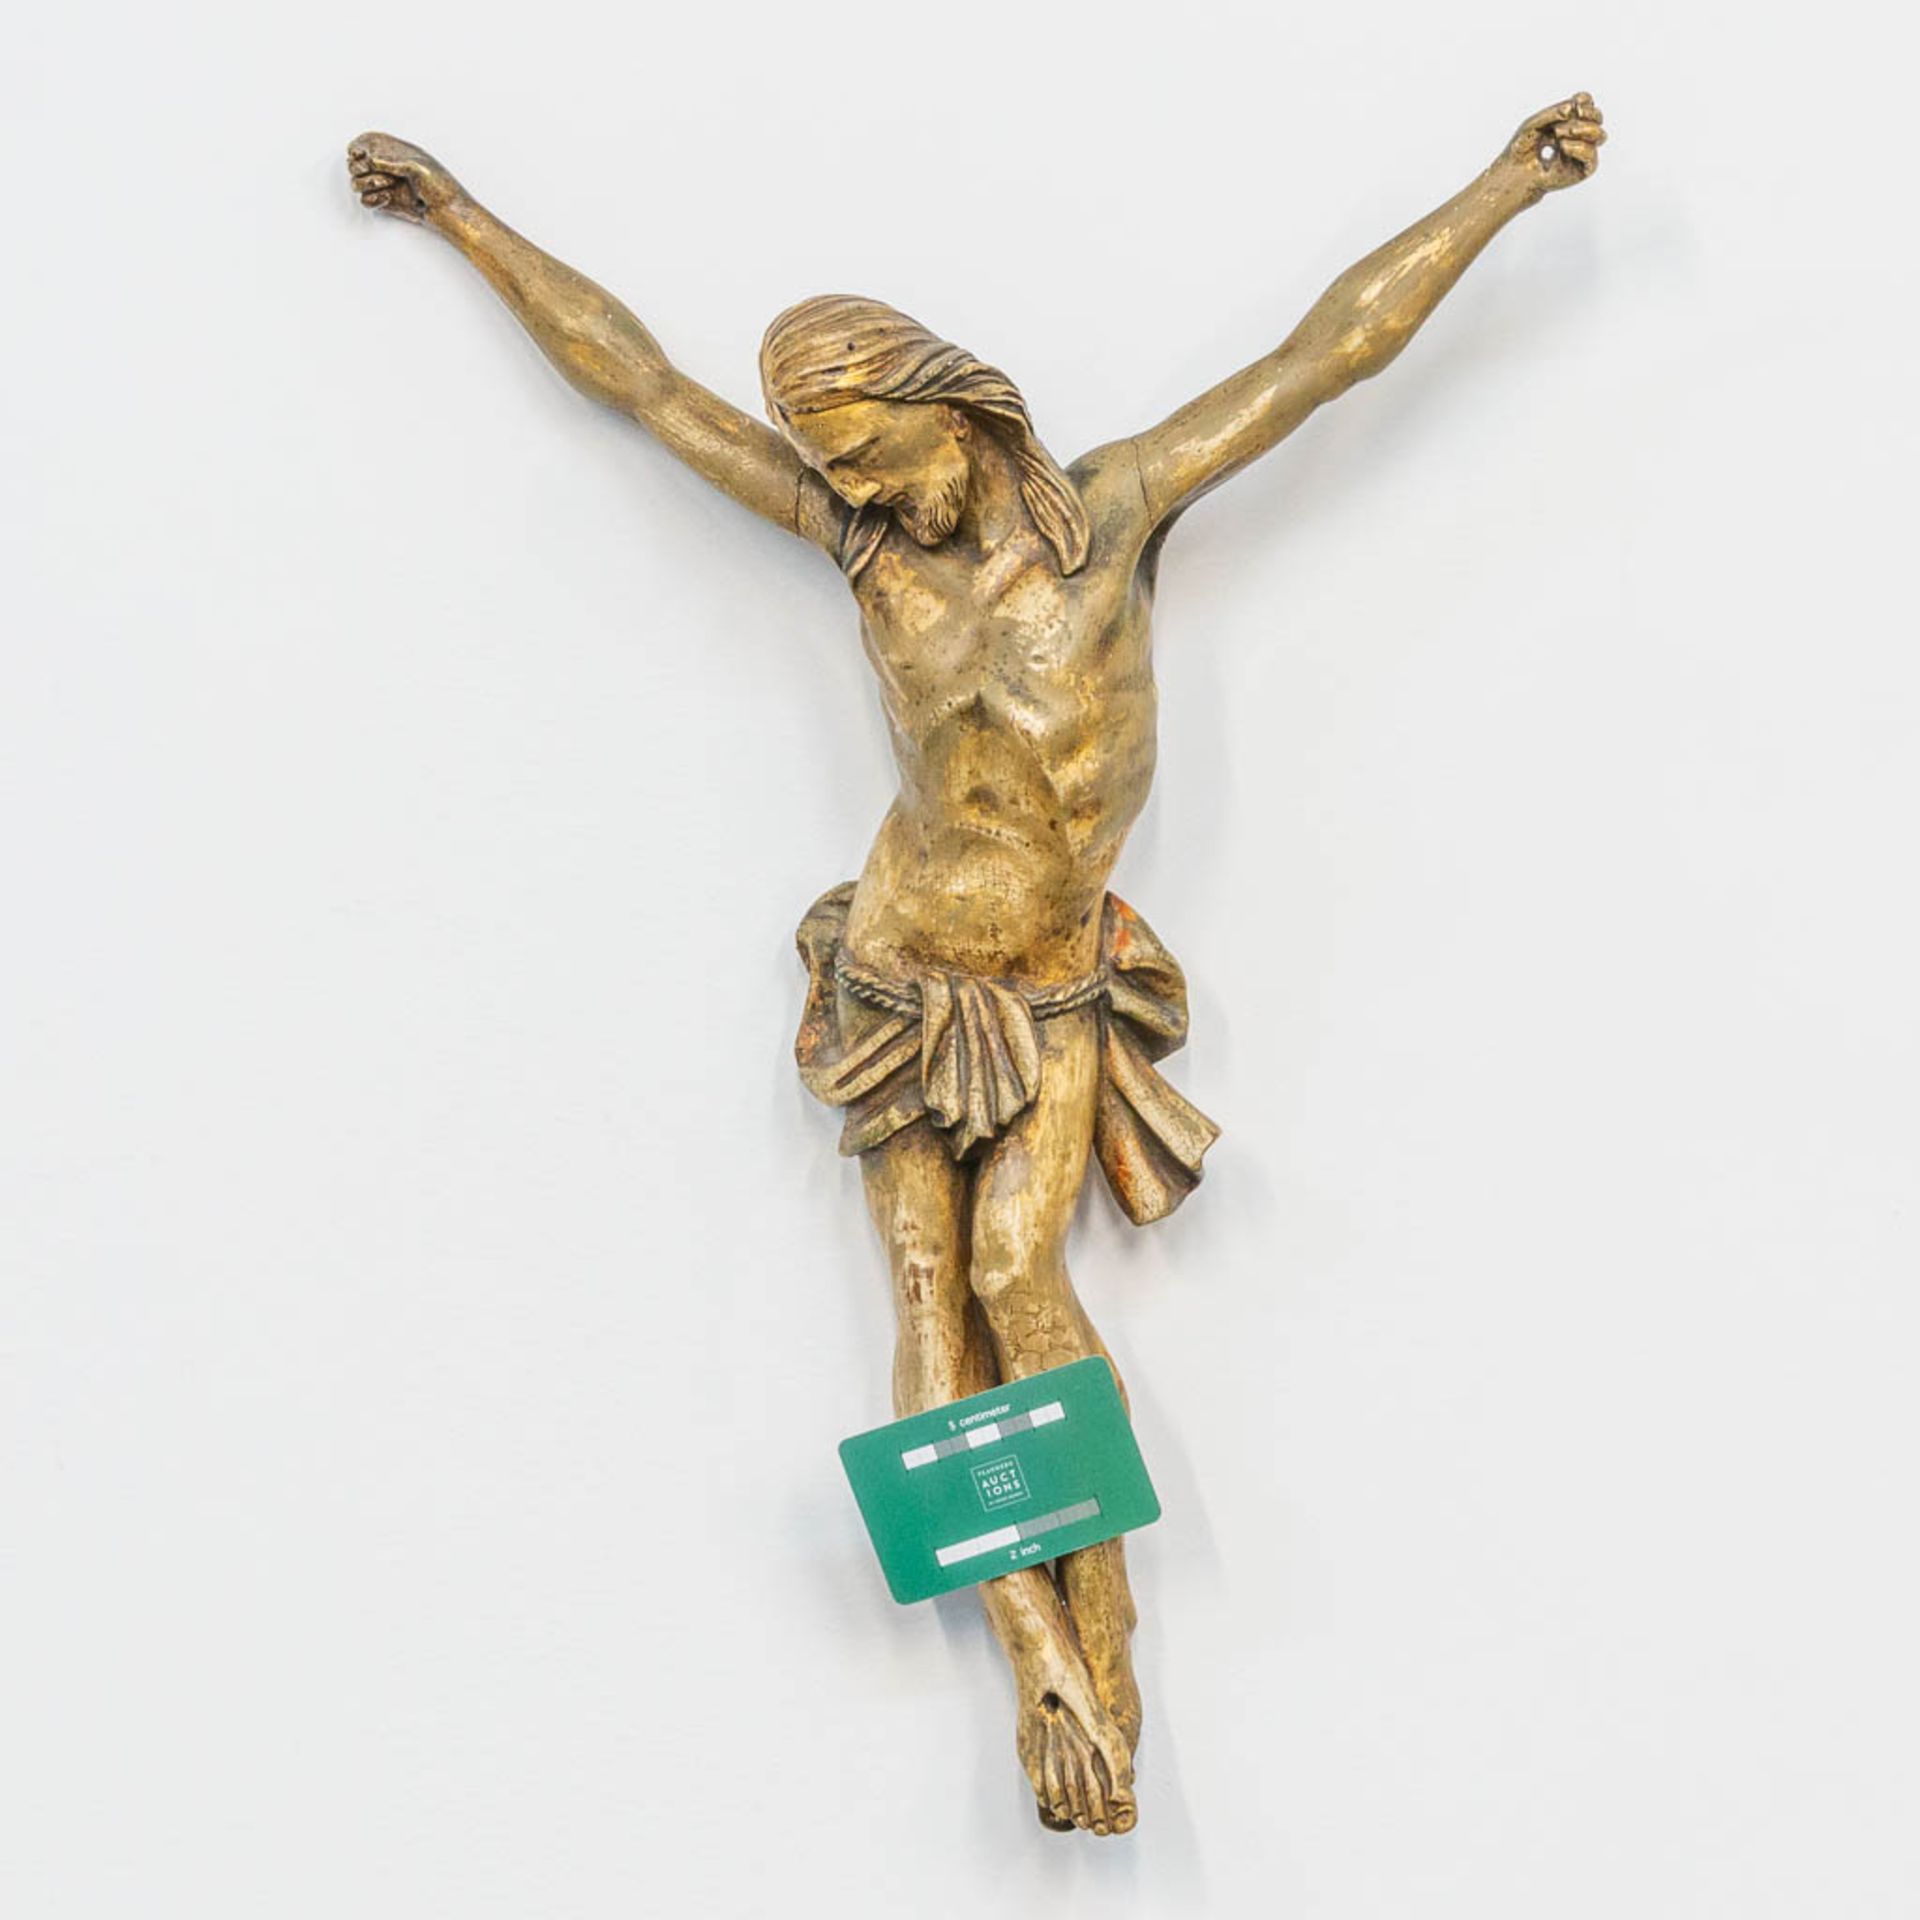 A wood sculptured Corpus of Jesus Christ, Gold plated, 18th century. - Image 4 of 9